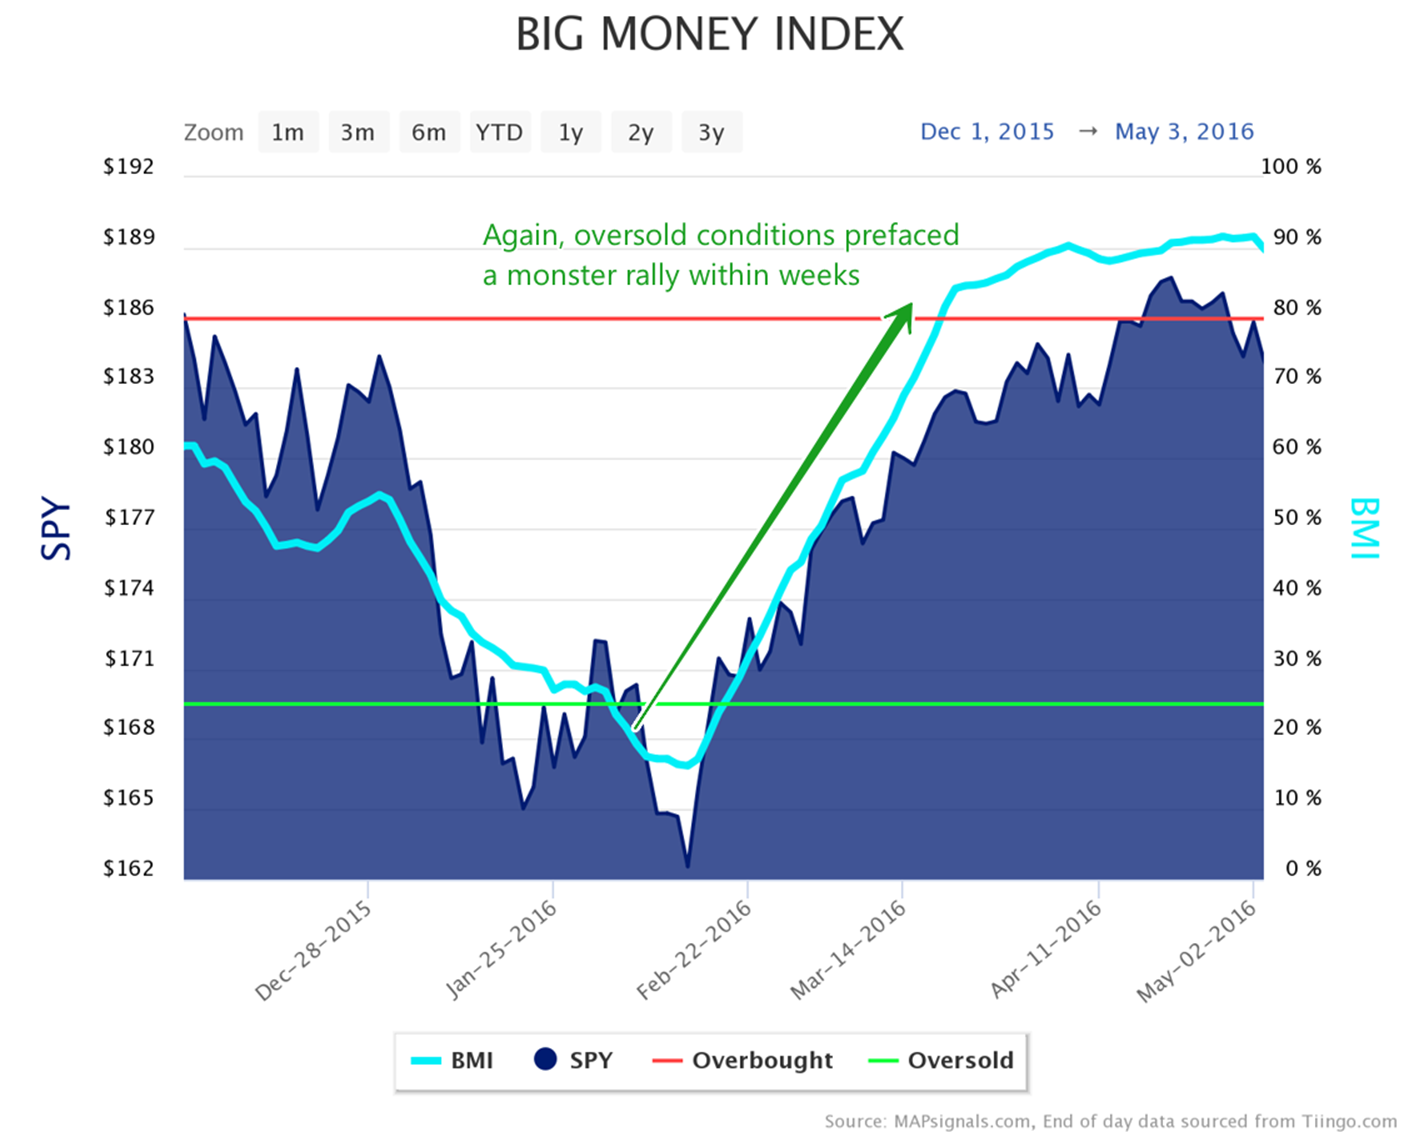 Oversold conditions prefaced a monster rally within weeks | Big Money Index